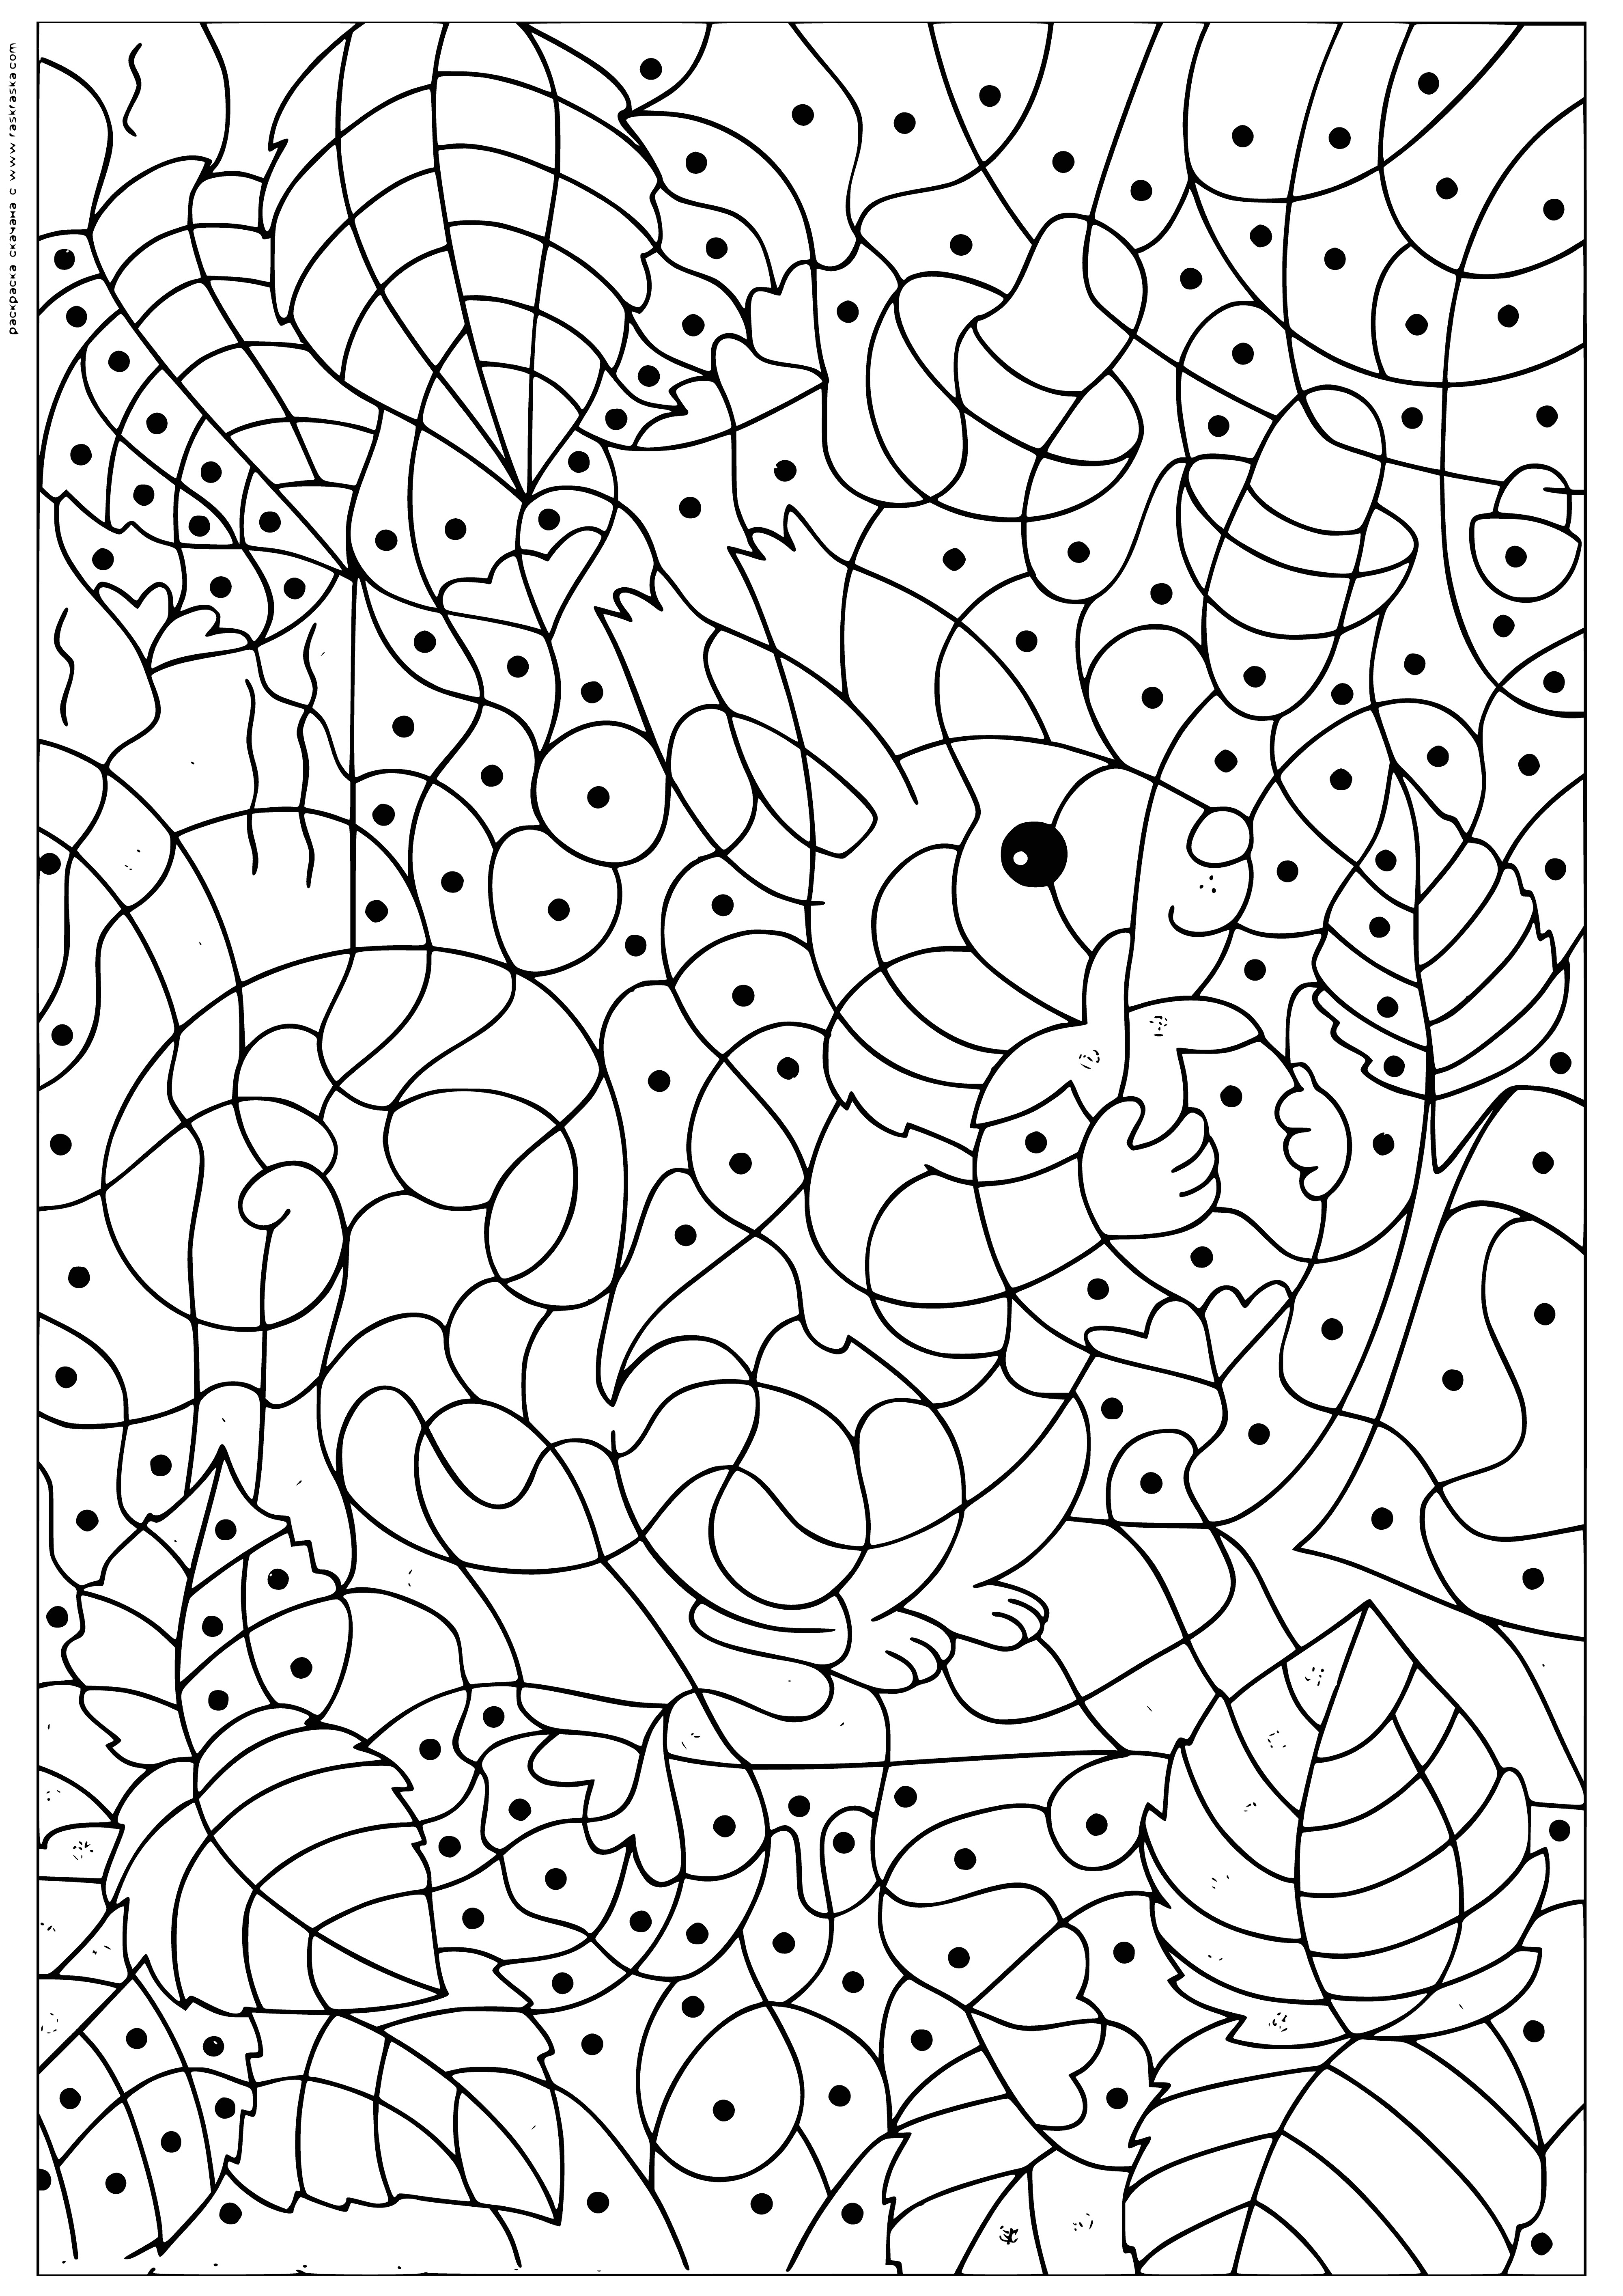 Squirrel with a nut coloring page